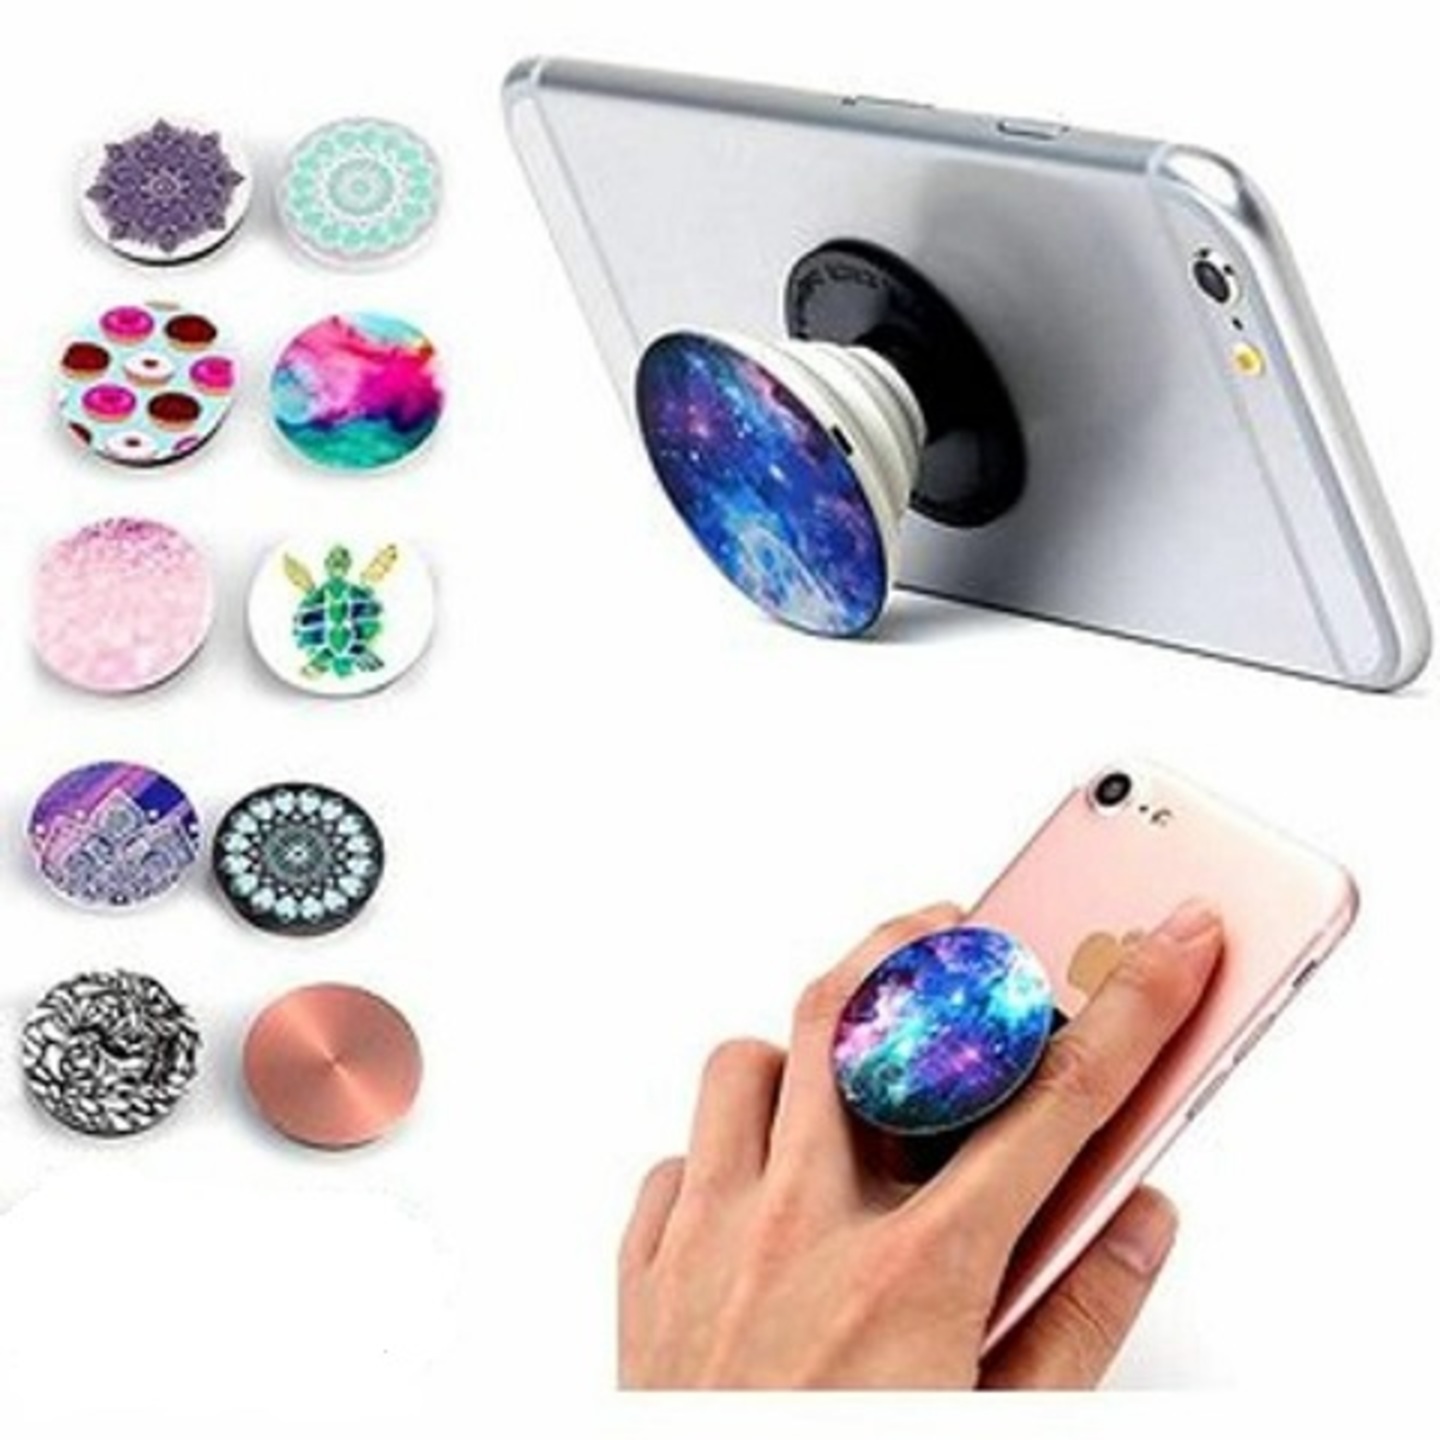 POPSOCKETS: Collapsible Grip for Phones and Tablets